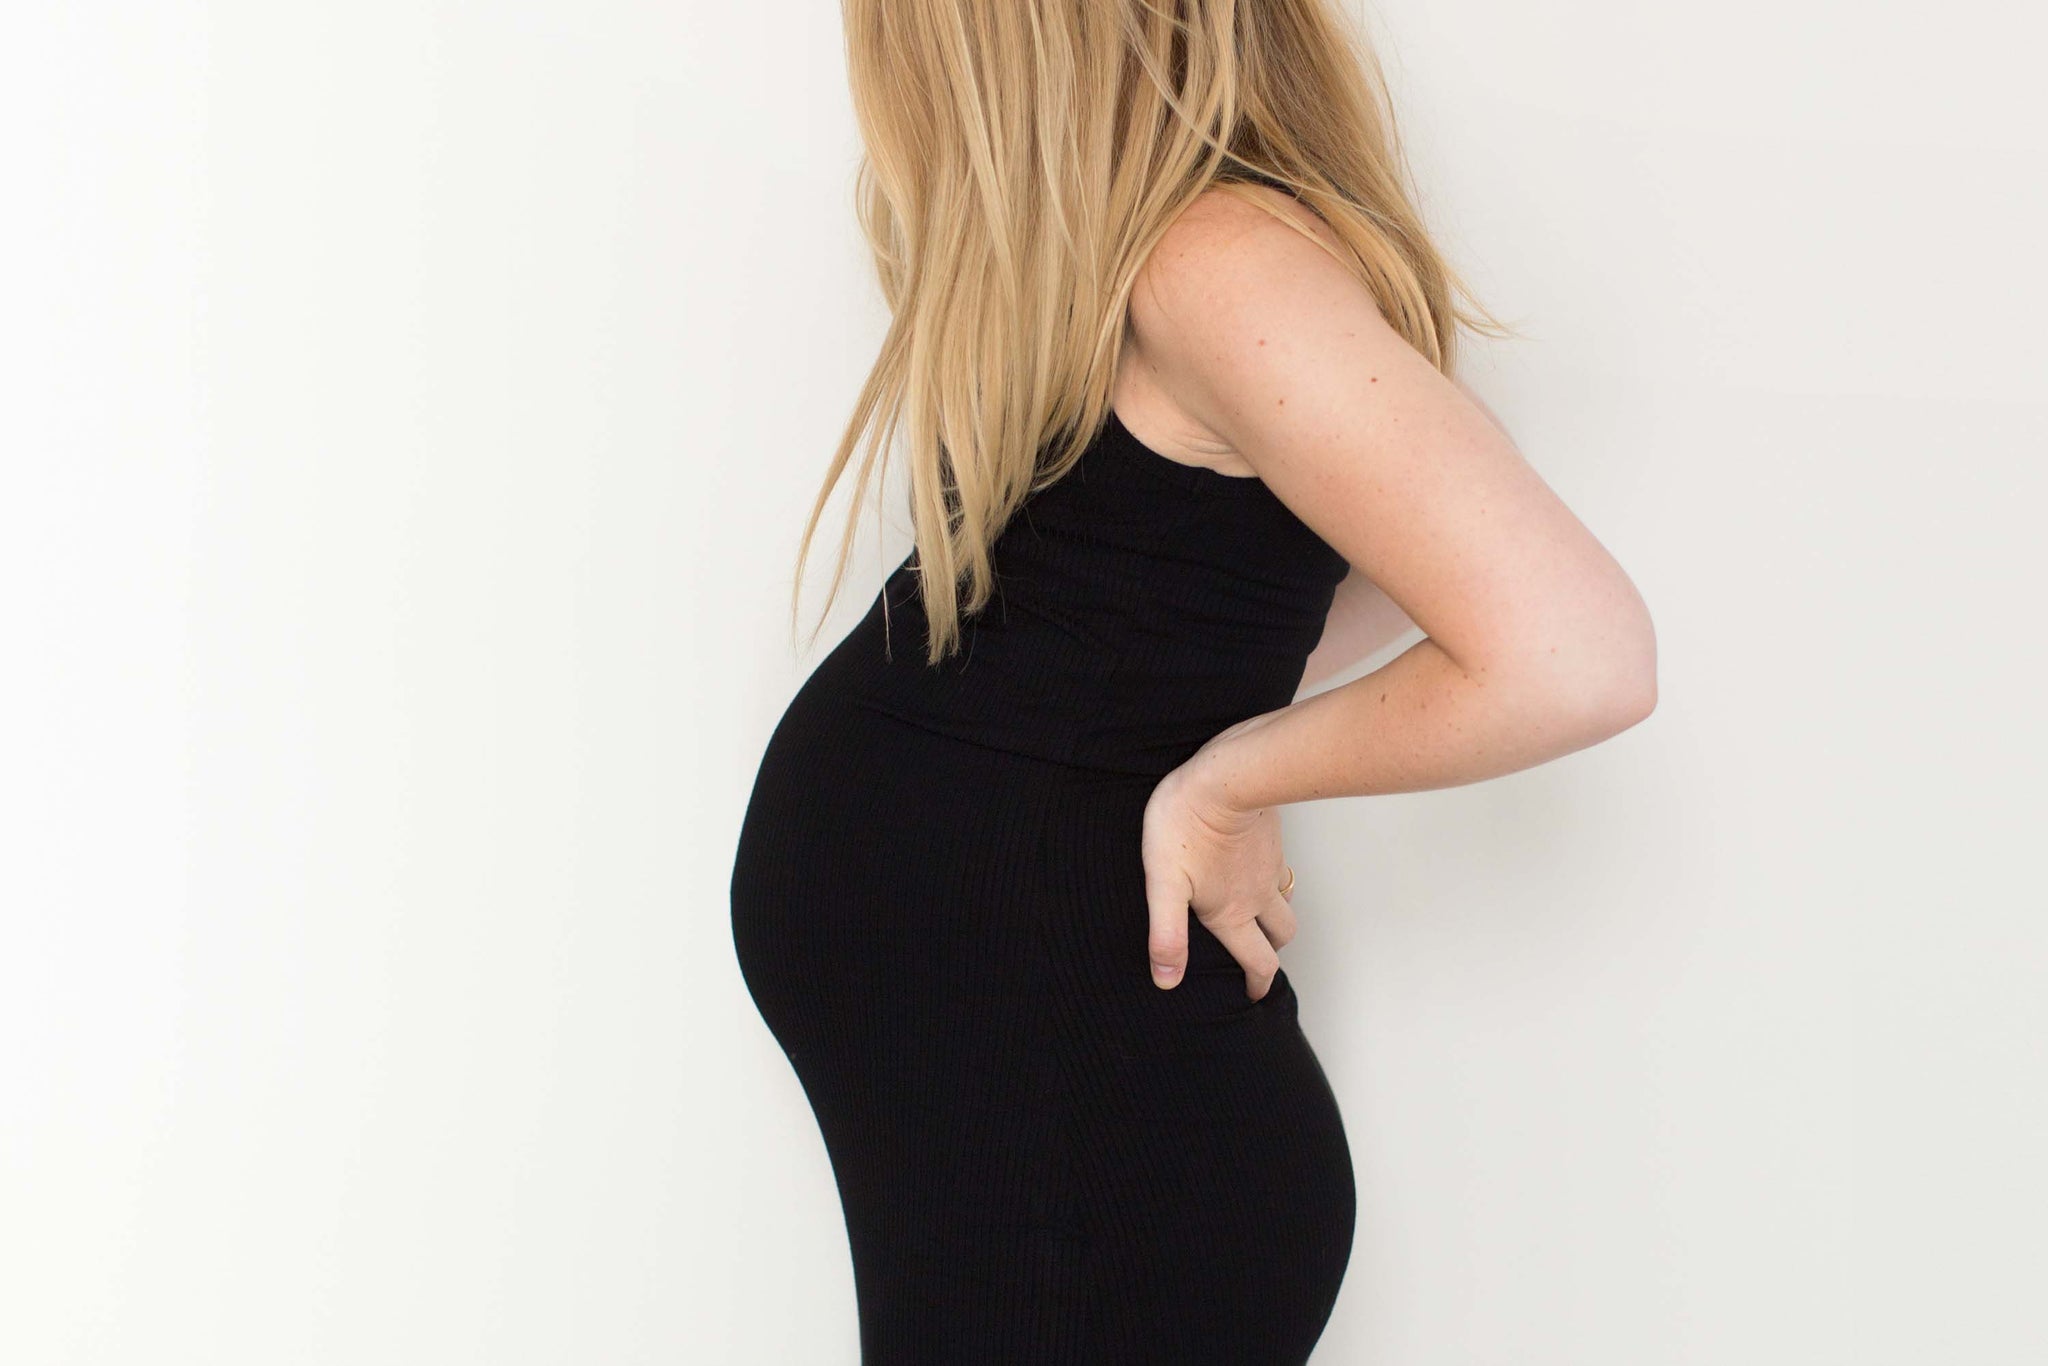 Pregnant woman - Model for Supplements to Increase Fertility blog of Getladywell